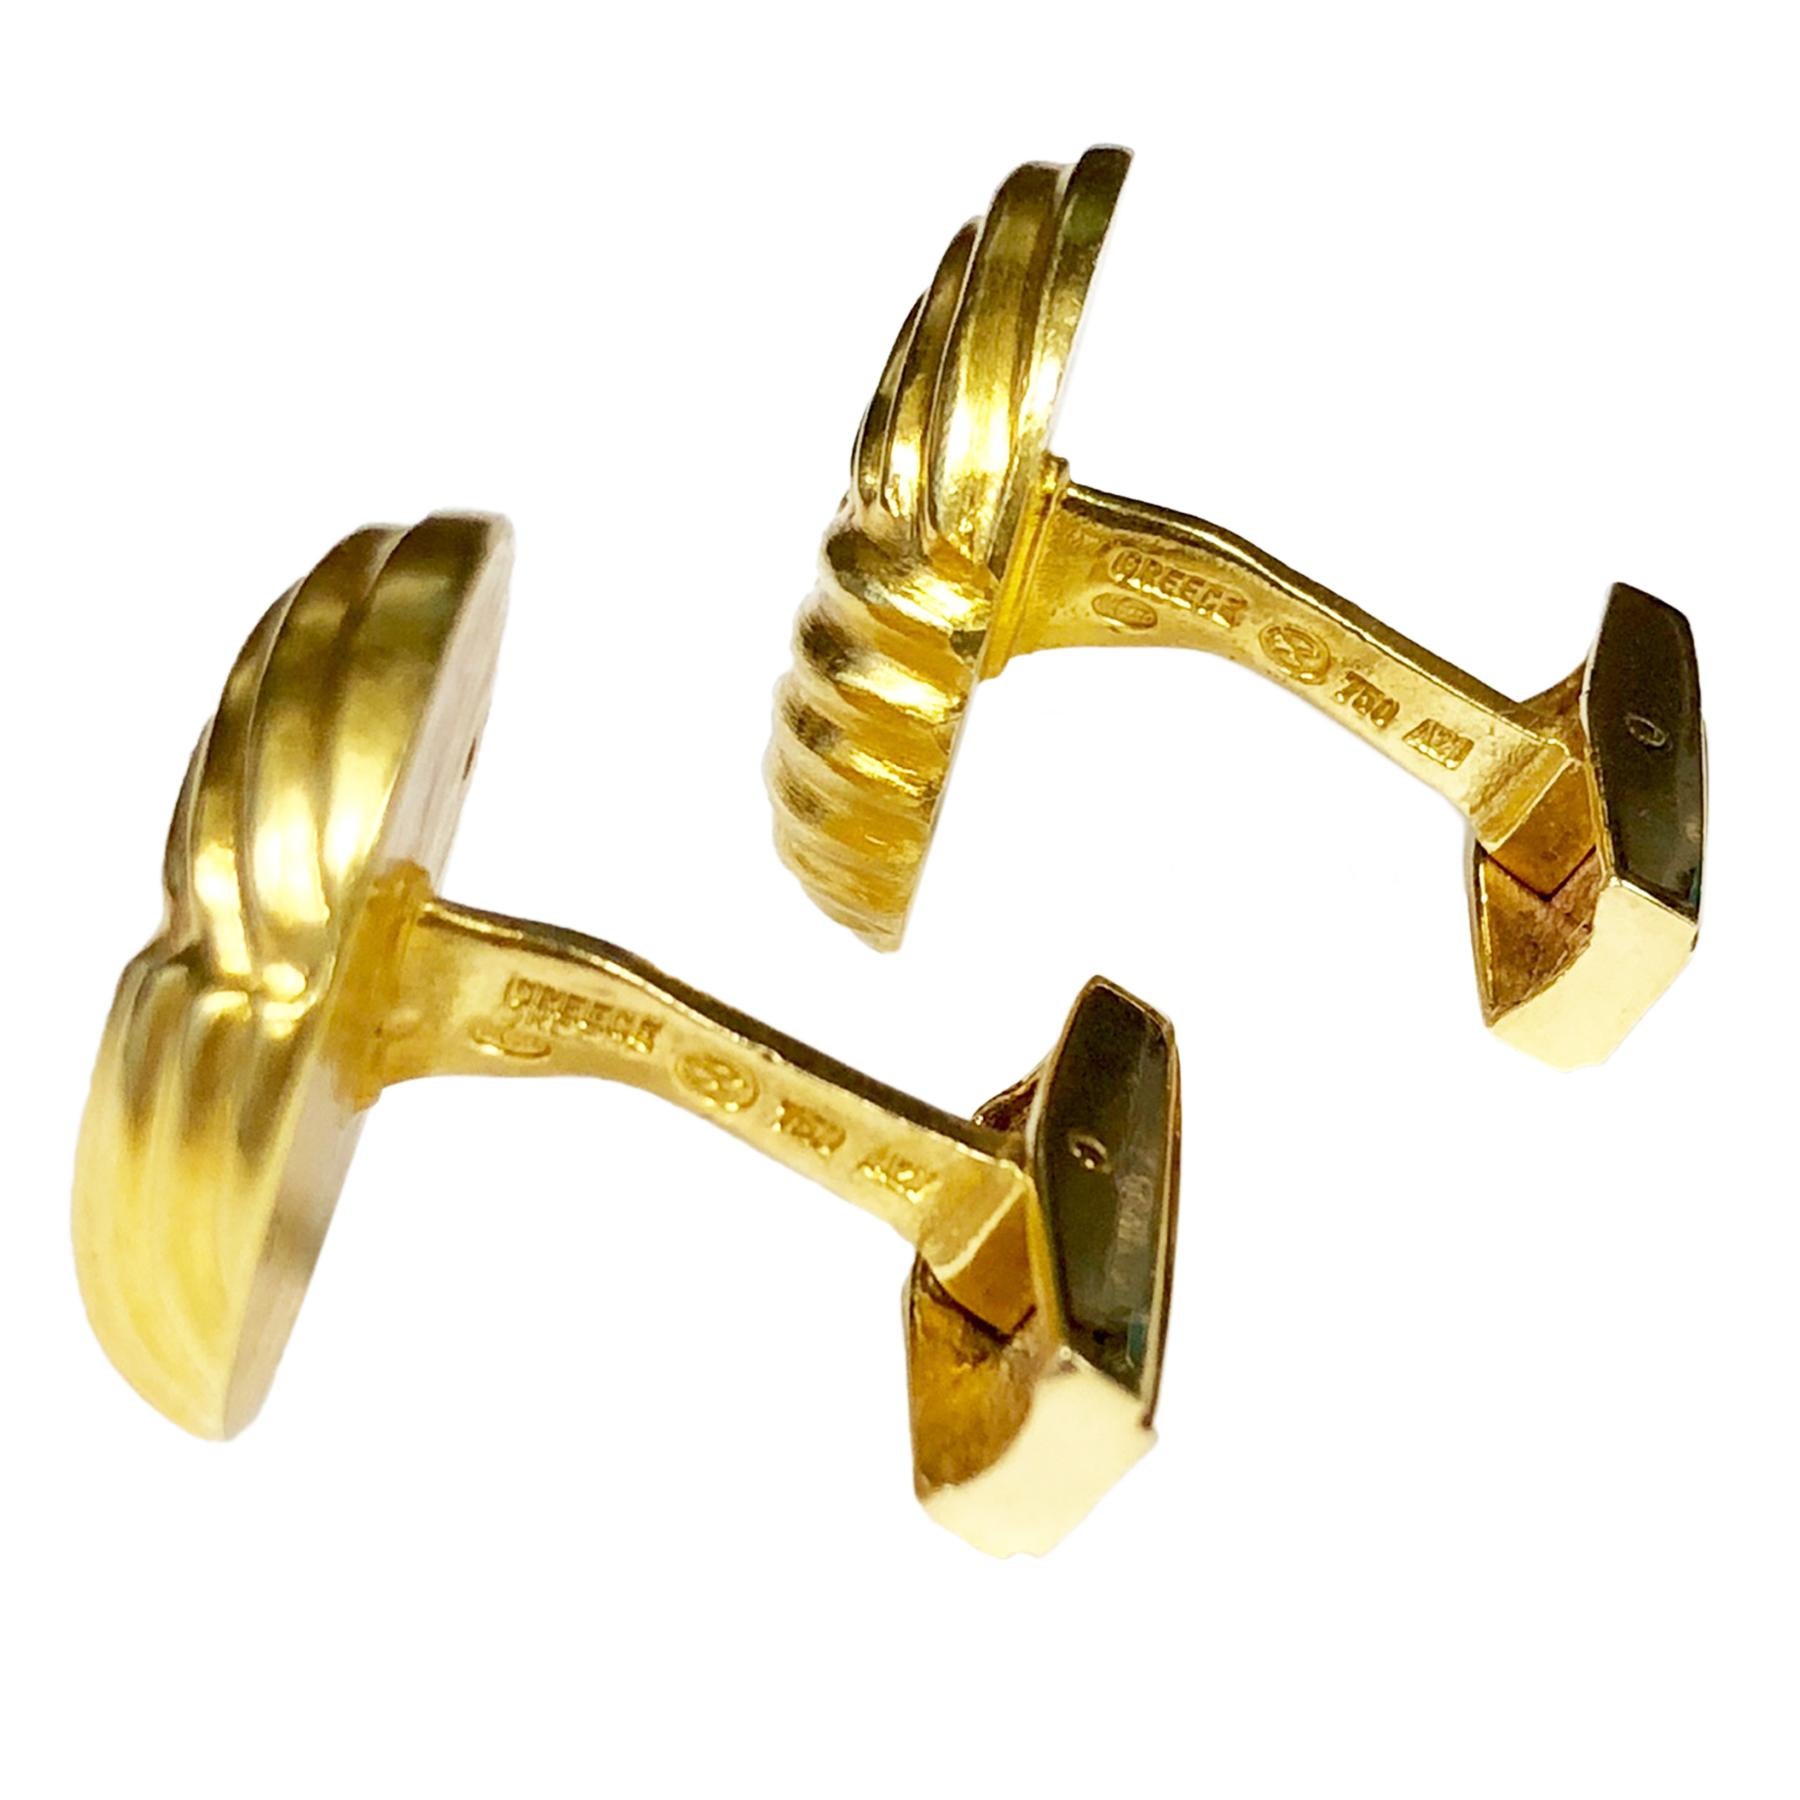 Circa 2000 18K Yellow Gold Cufflinks by Ilias Lalaounis Greece, having a deep grooved design the tops measure 3/4 inch in diameter, having toggle backs for easy on and off. These come in the original Lalaounis Gift box.